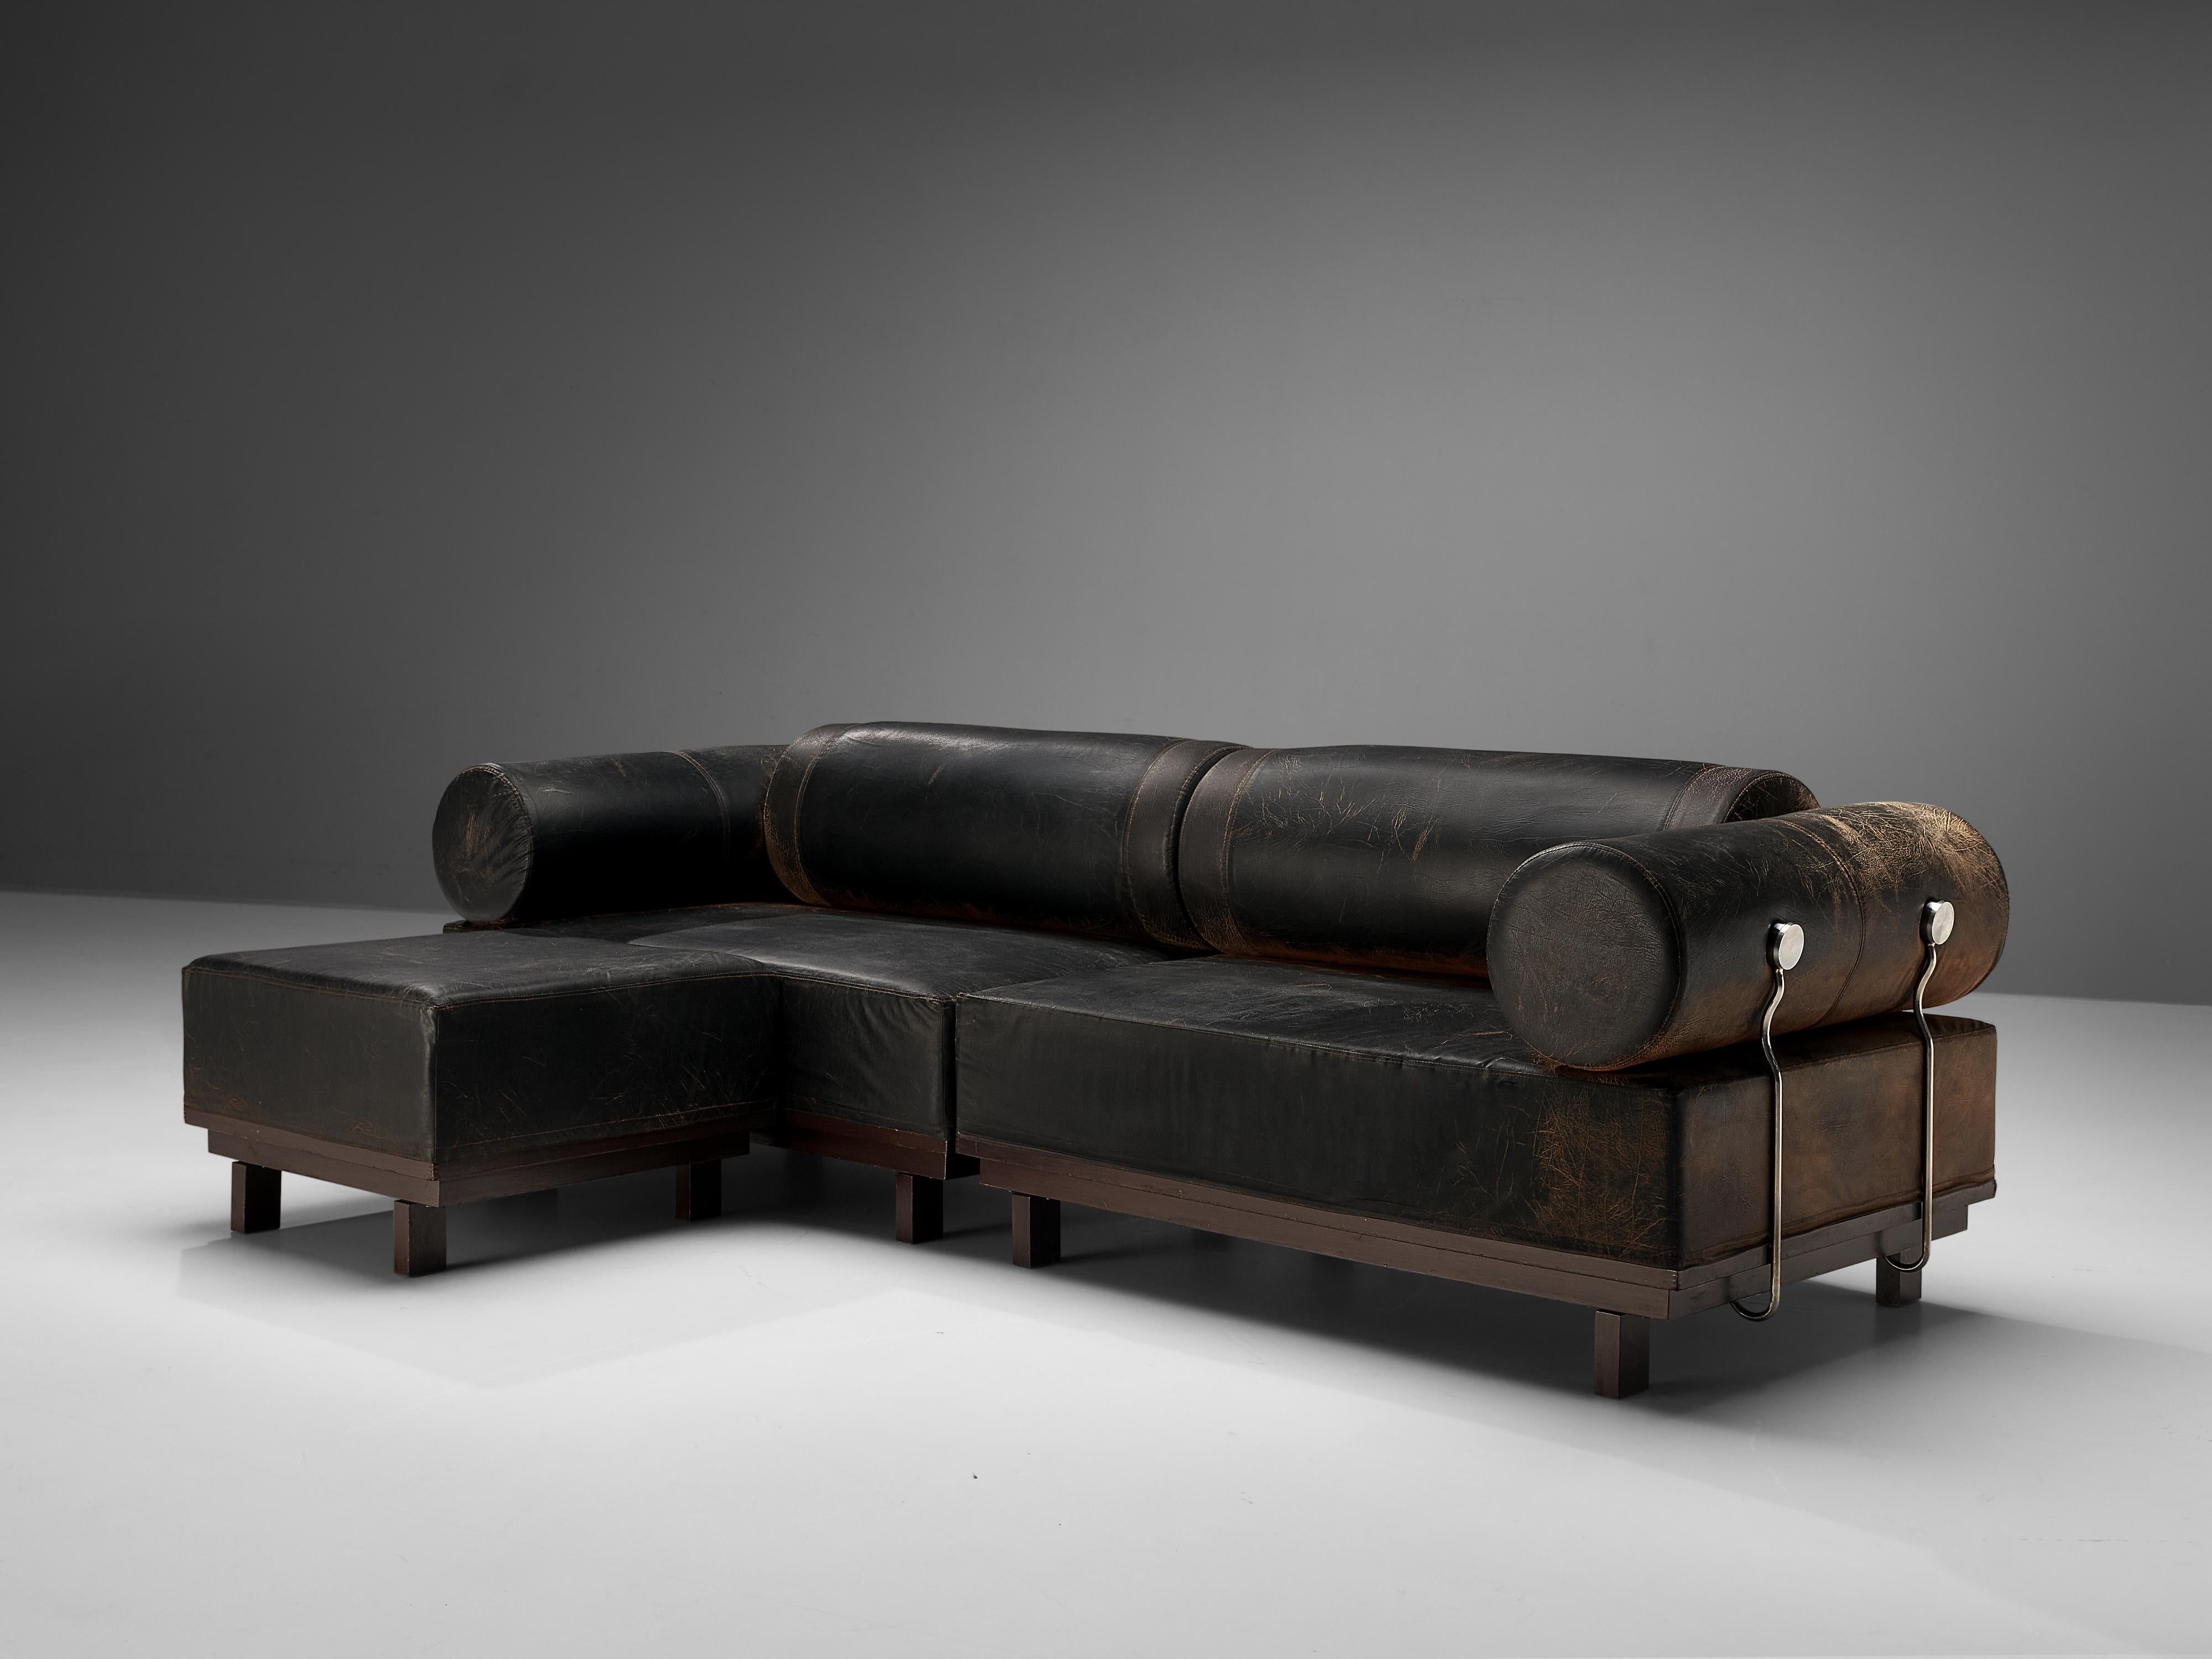 Bulky Modular Sofa in Leatherette and Metal Details 5